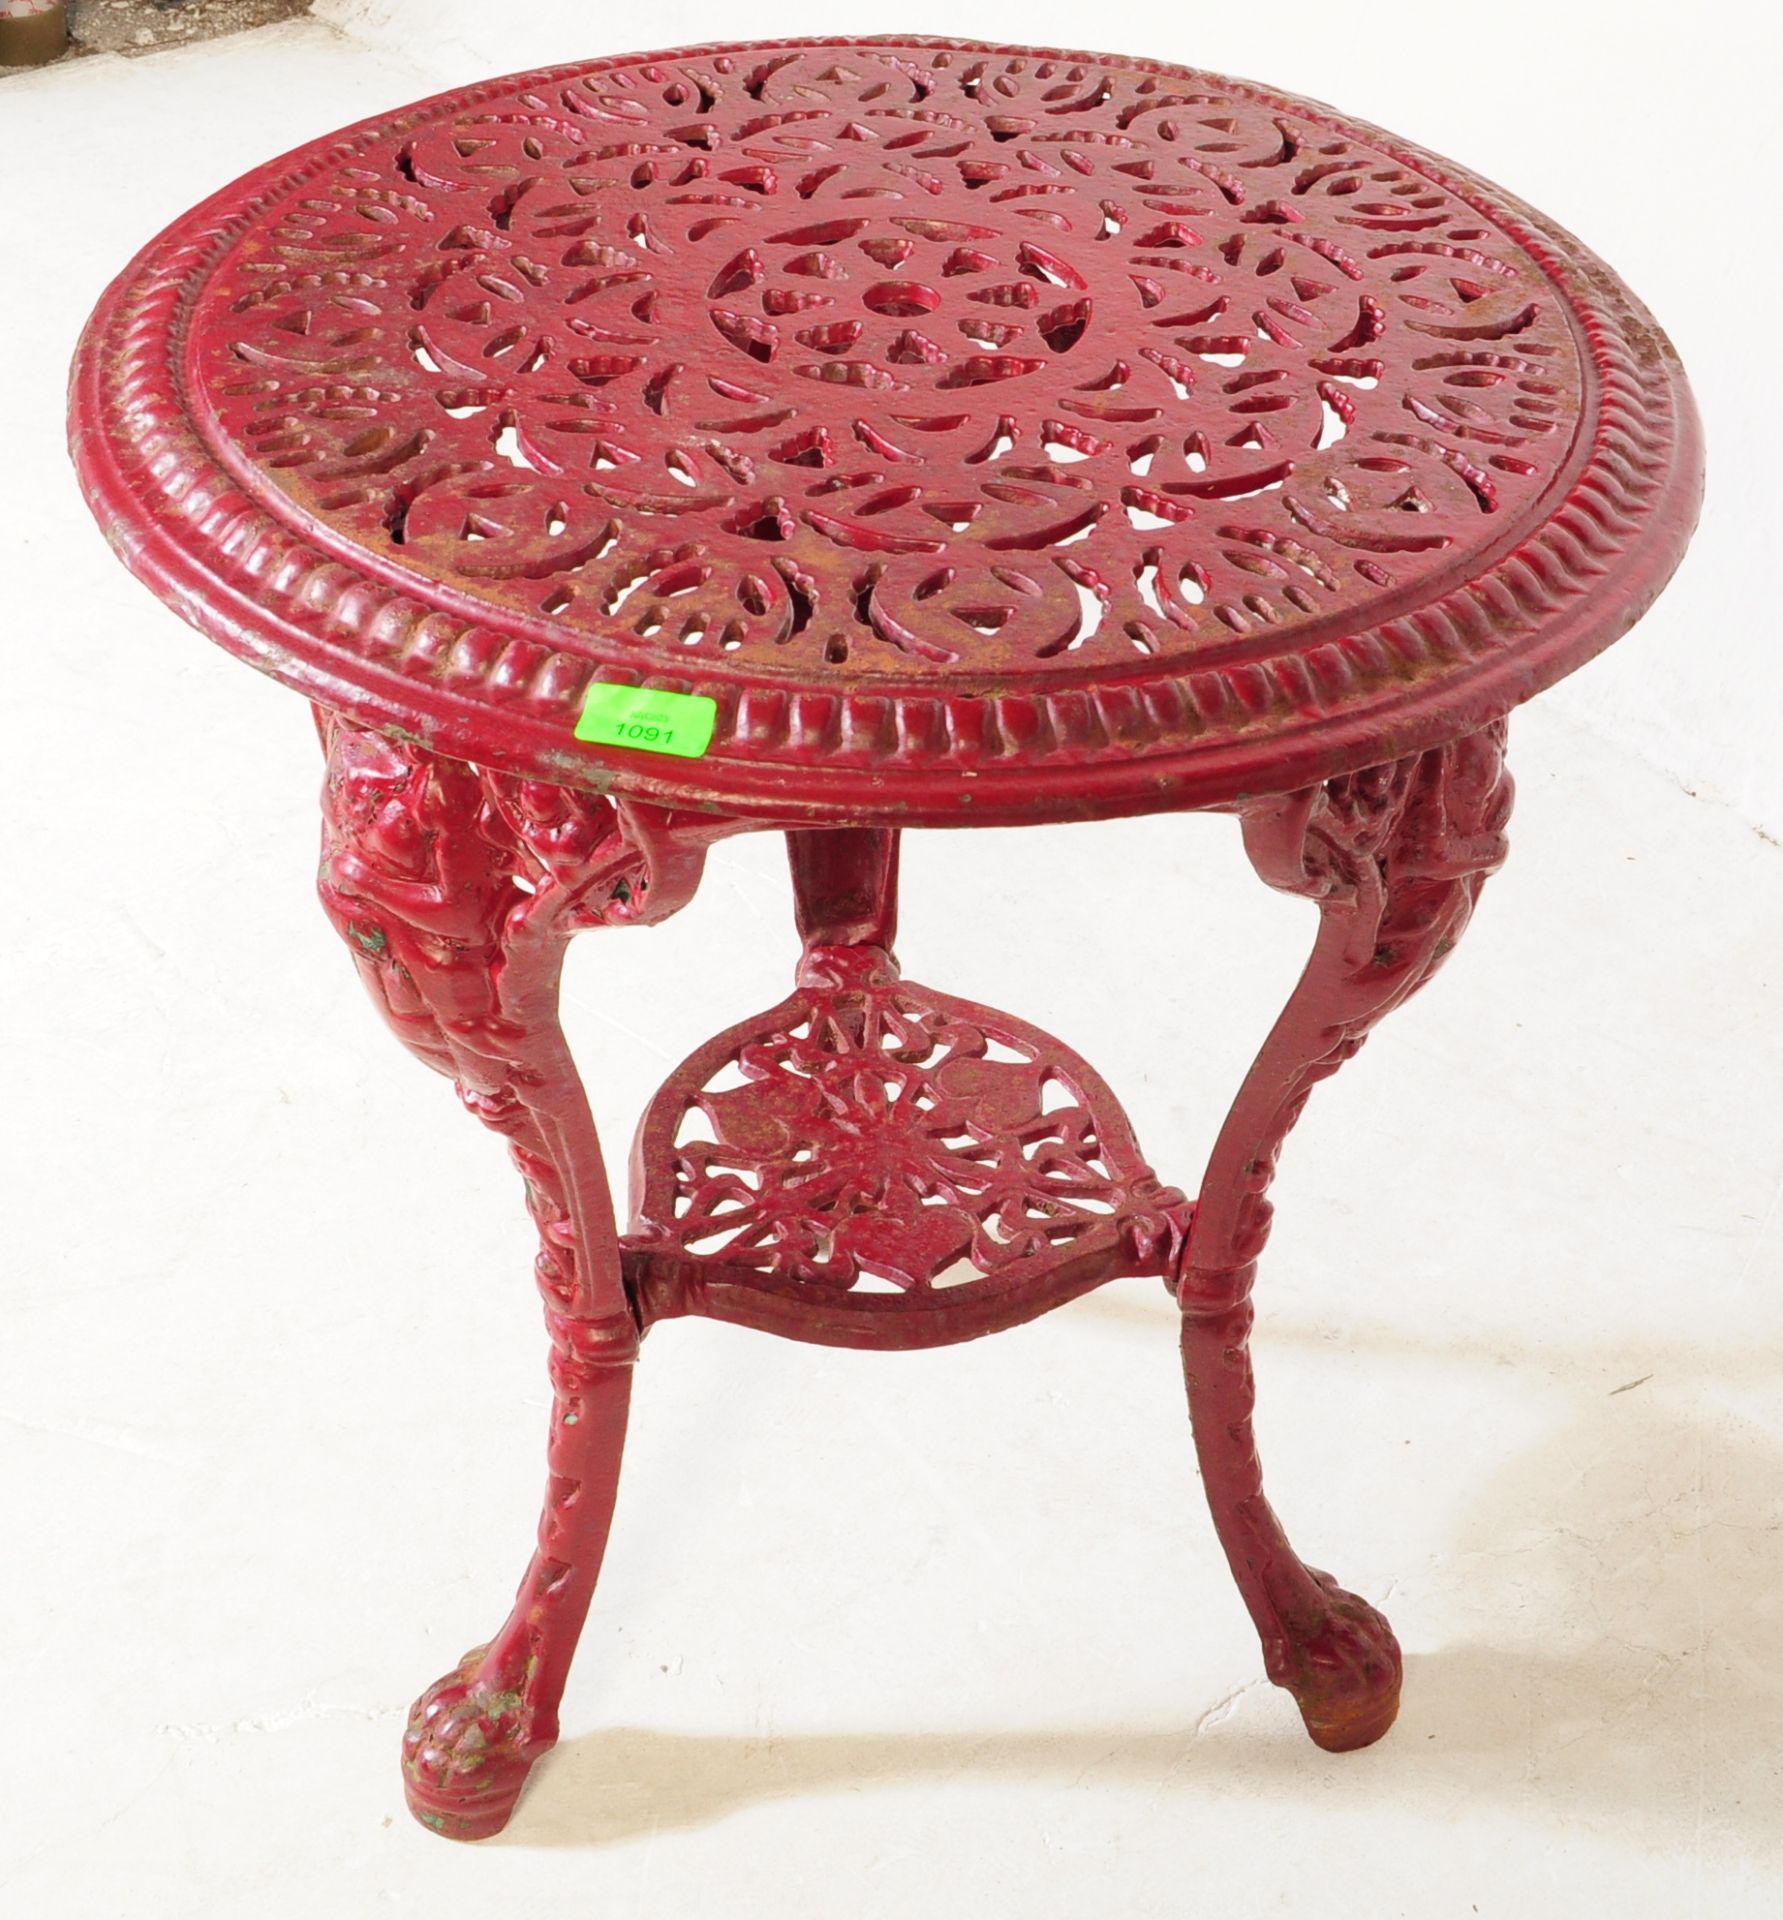 VICTORIAN PAINTED CAST IRON COALBROOKDALE STYLE GARDEN TABLE - Image 2 of 4